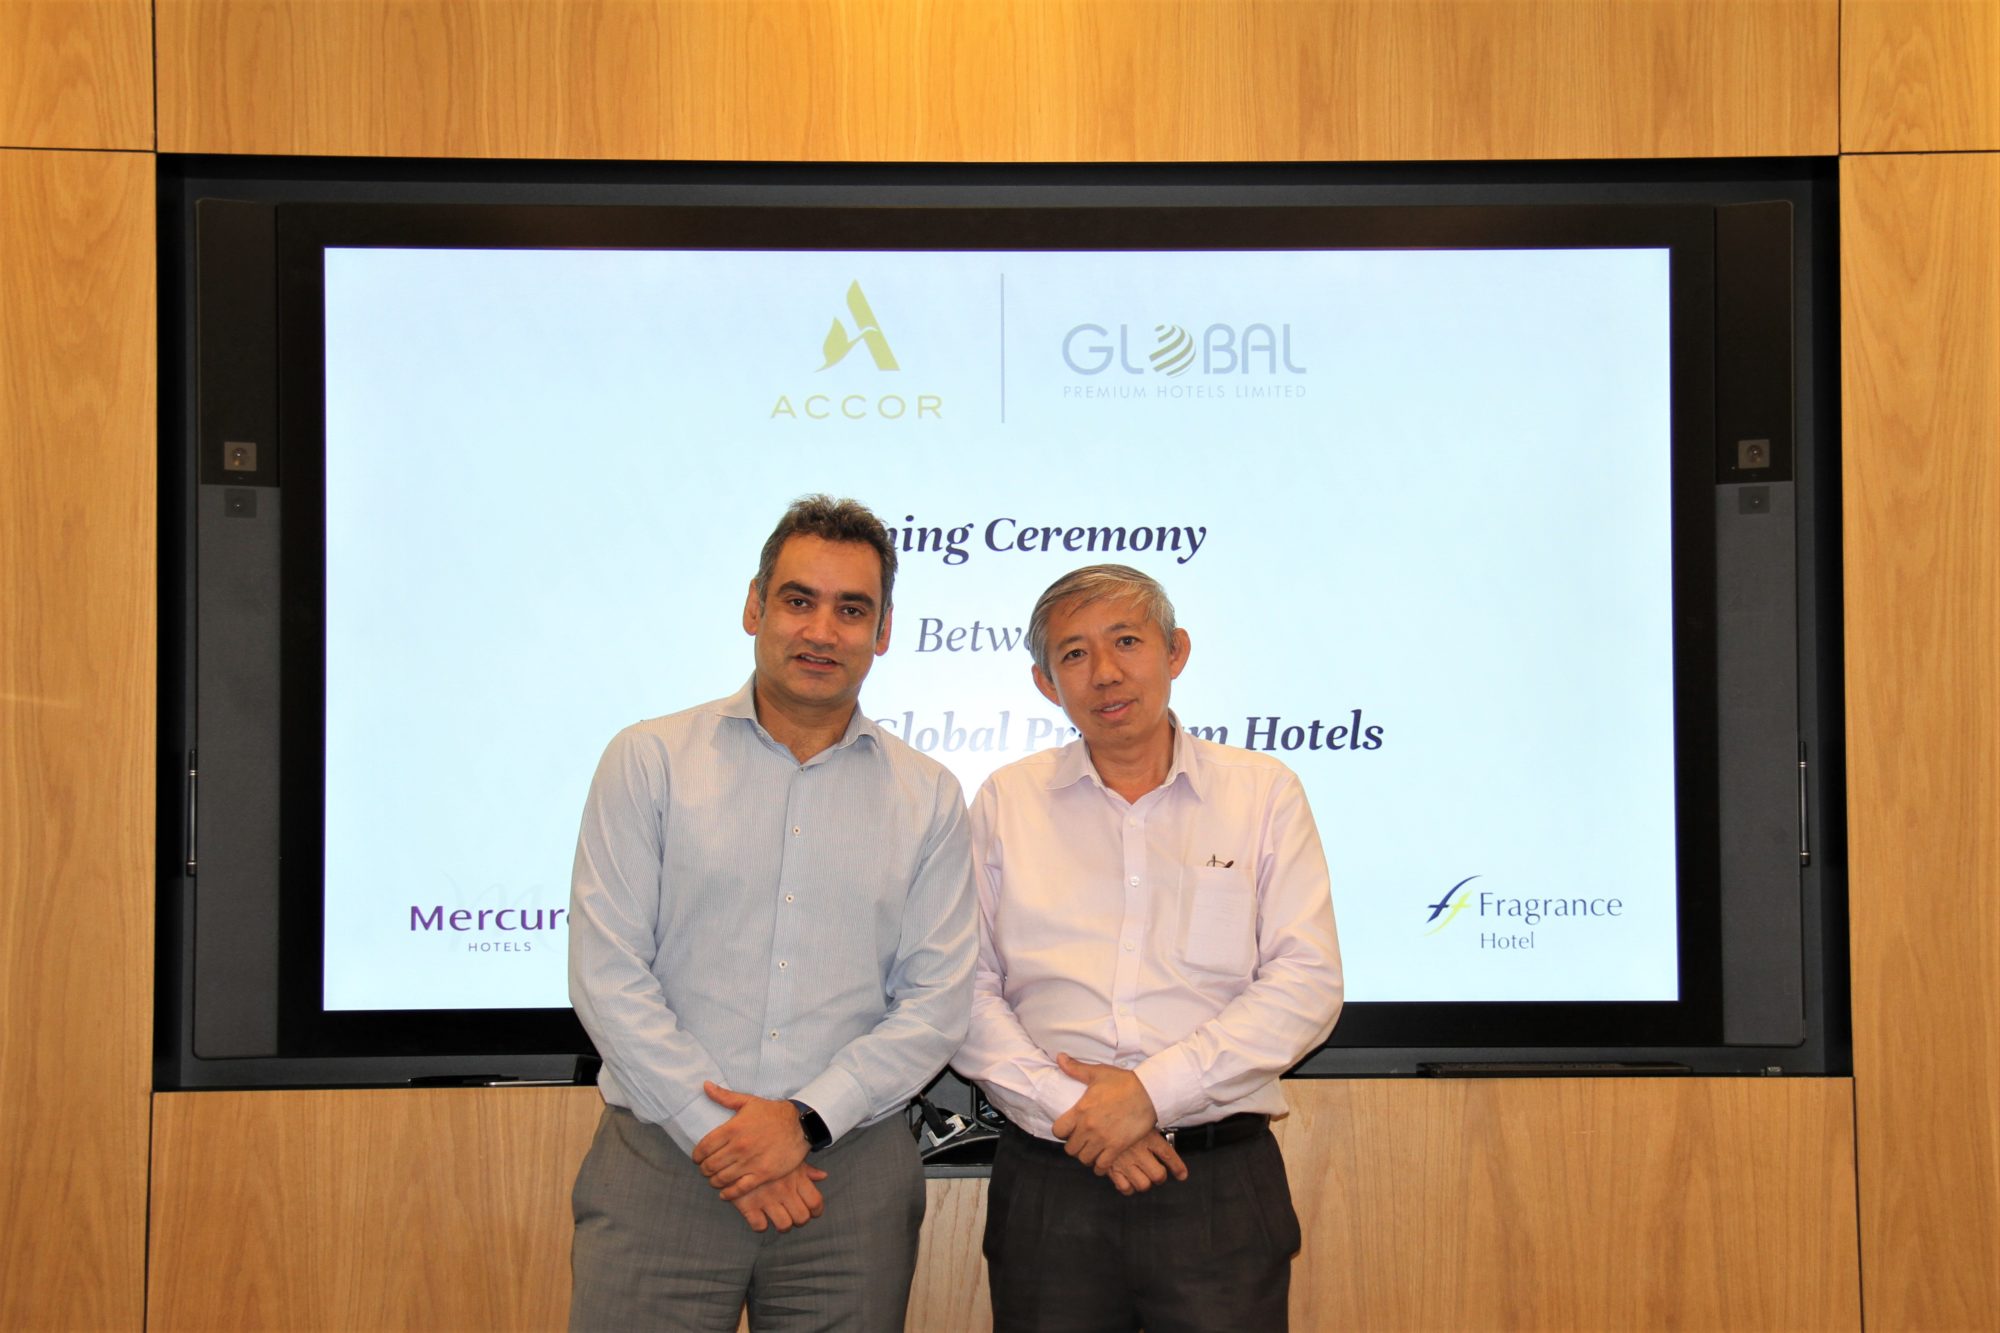 Gaurav Bhushan – Global Chief Development Officer Accor and Dr James Koh –  Owner Global Premium Hotels Limited